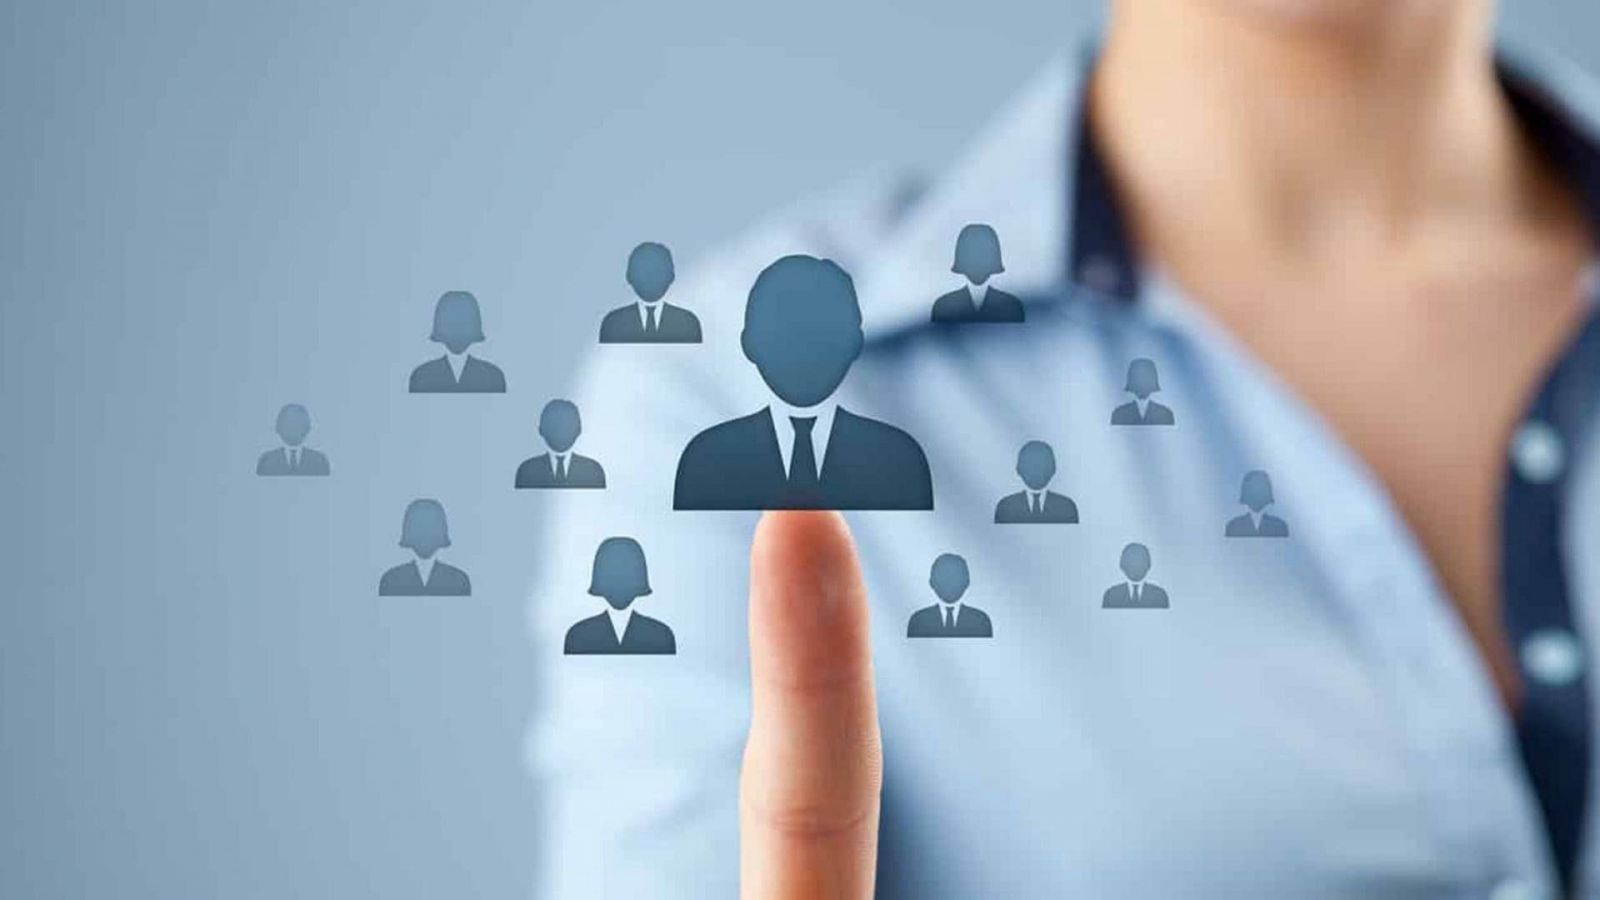 Accelerate recruitment to avoid missing out on high-quality human resources